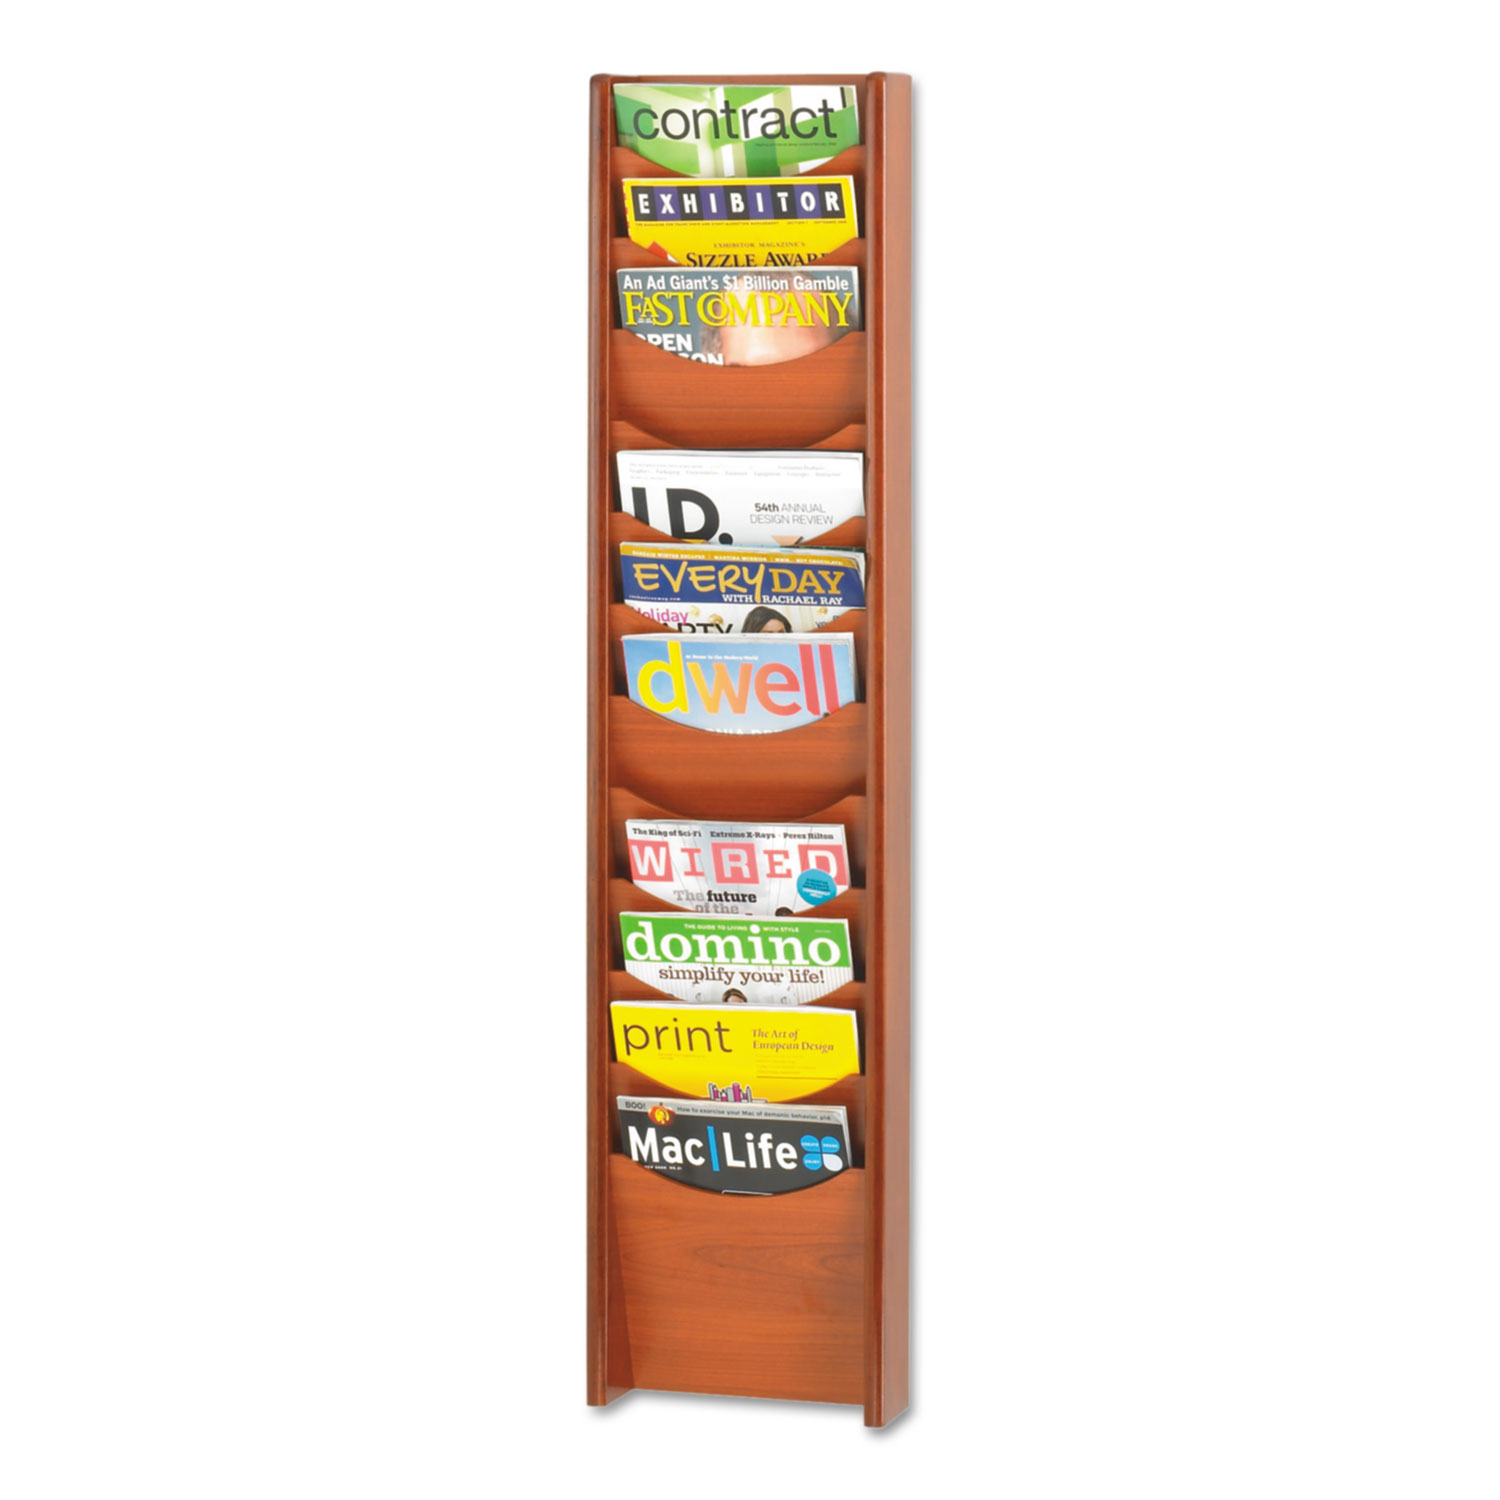  Safco 4331CY Solid Wood Wall-Mount Literature Display Rack, 11.25w x 3.75d x 48.75h, Cherry (SAF4331CY) 